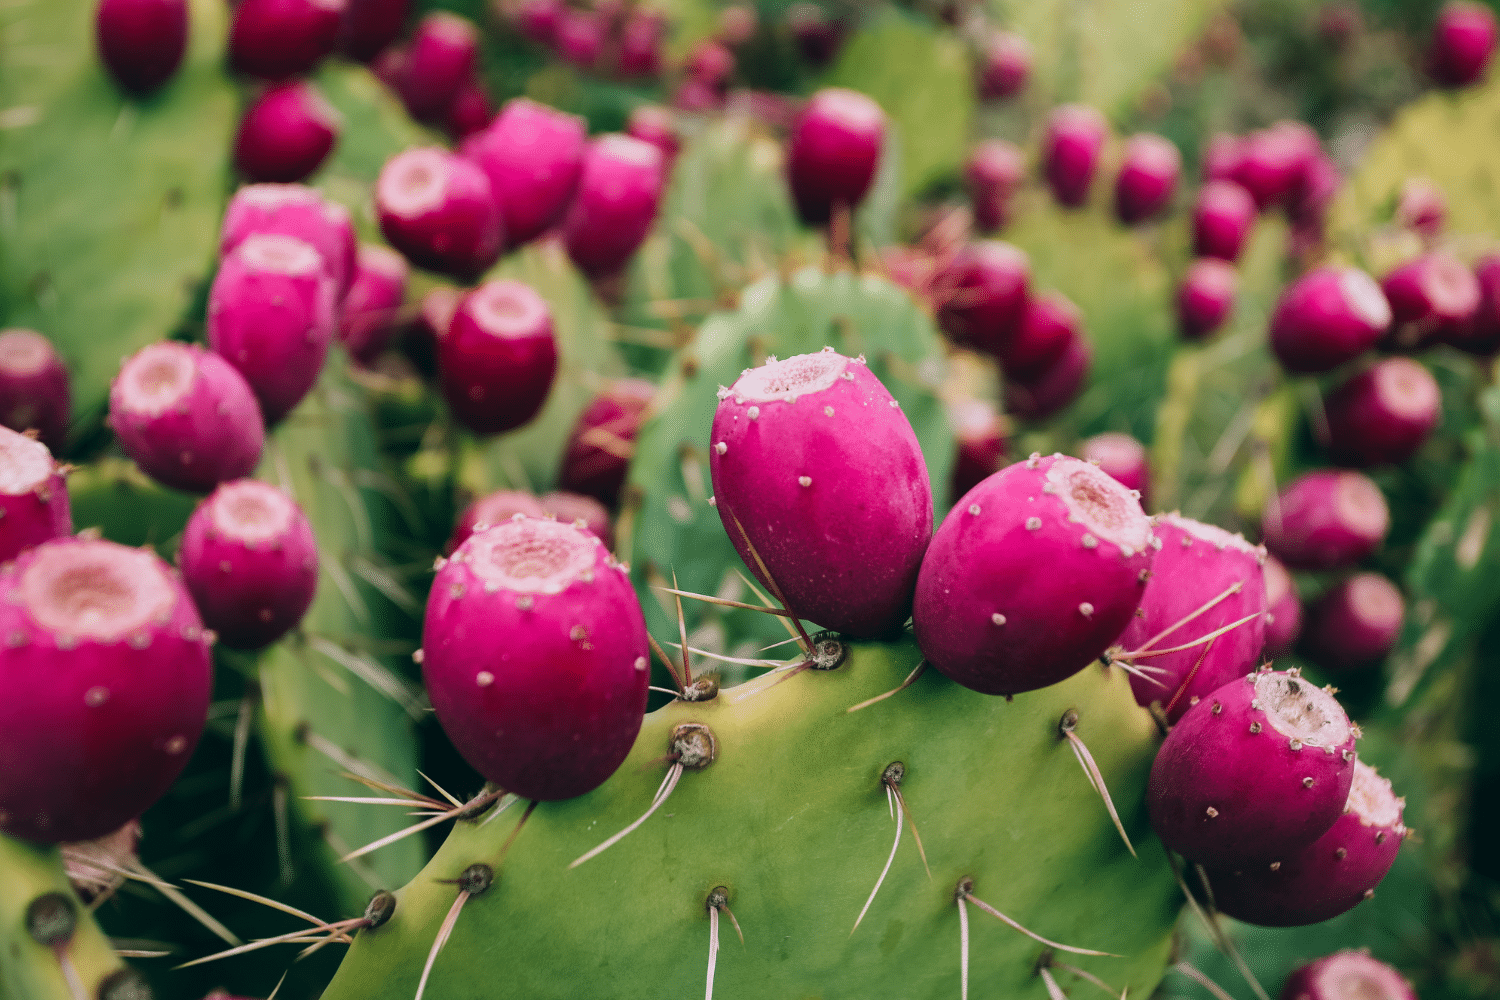 Prickly Pear for Skin: The Complete Guide